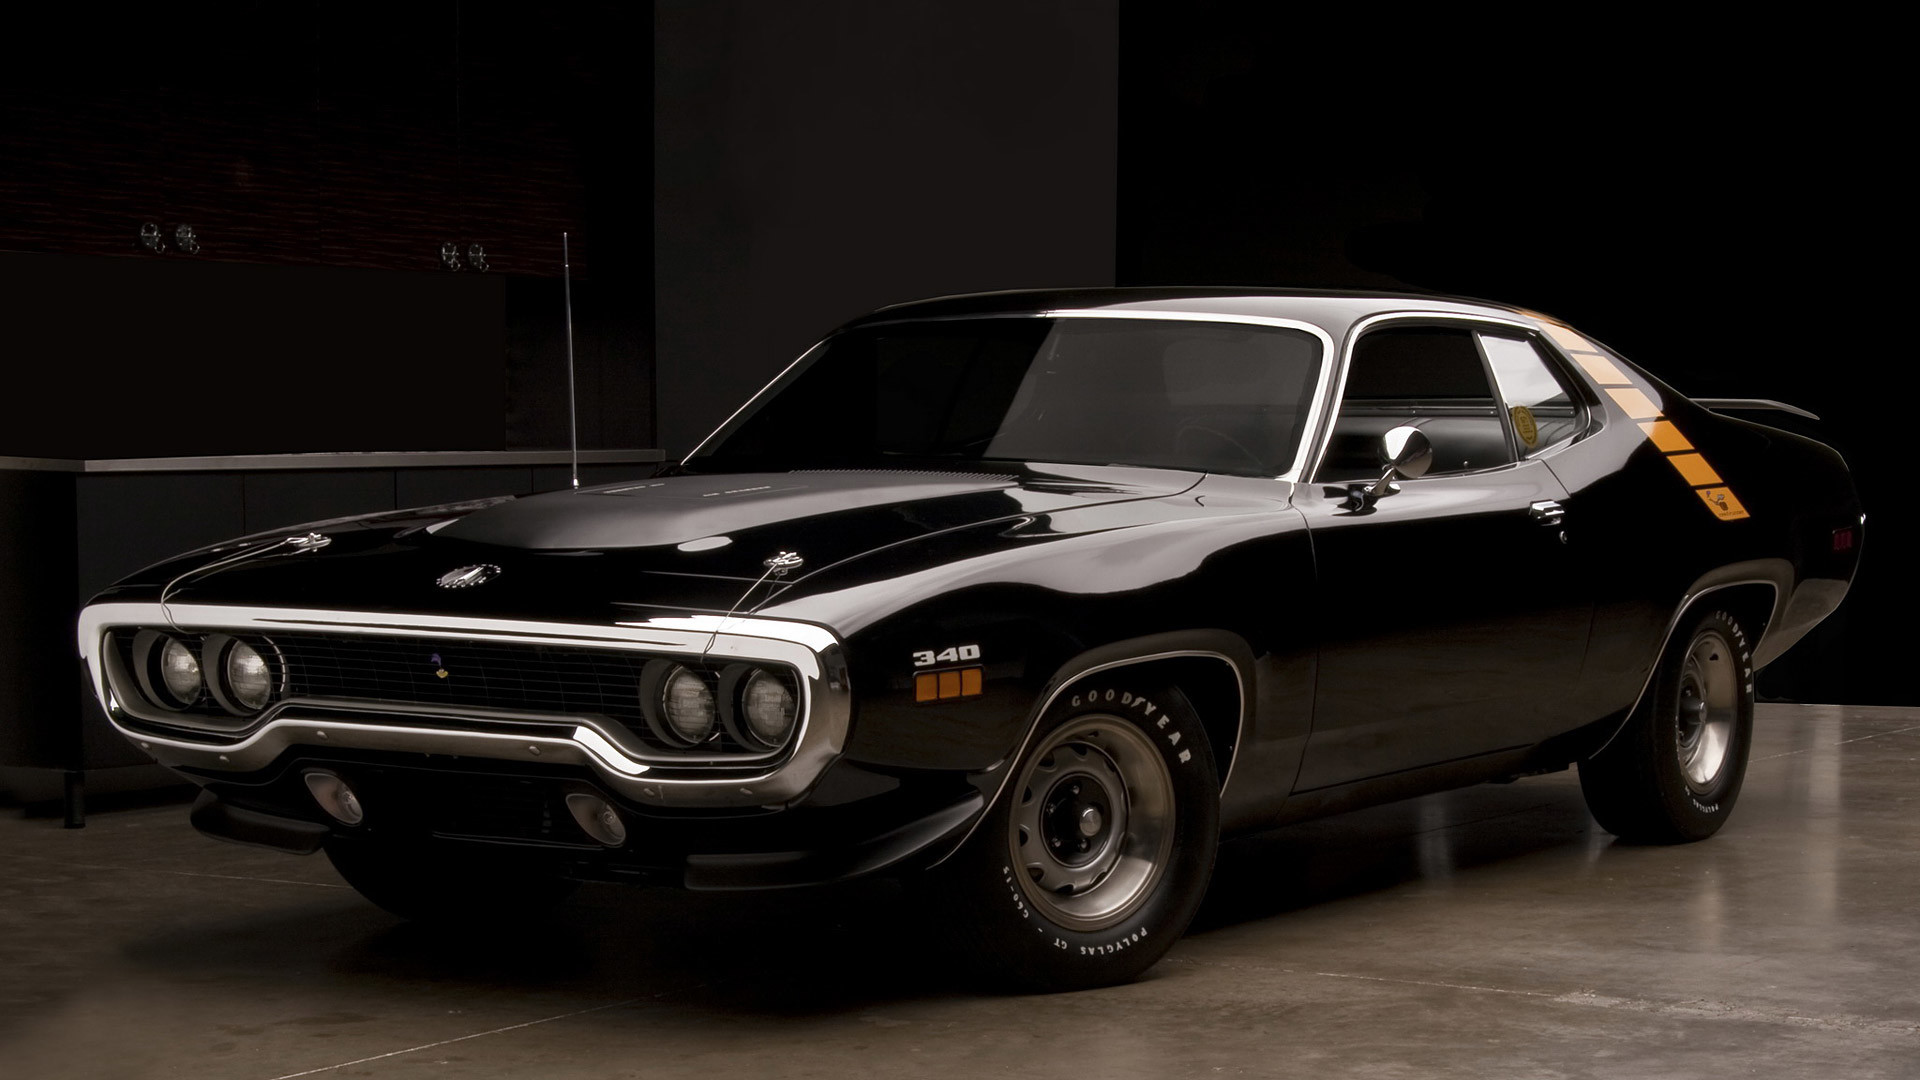 1920x1080 1971 Plymouth Road Runner picture.